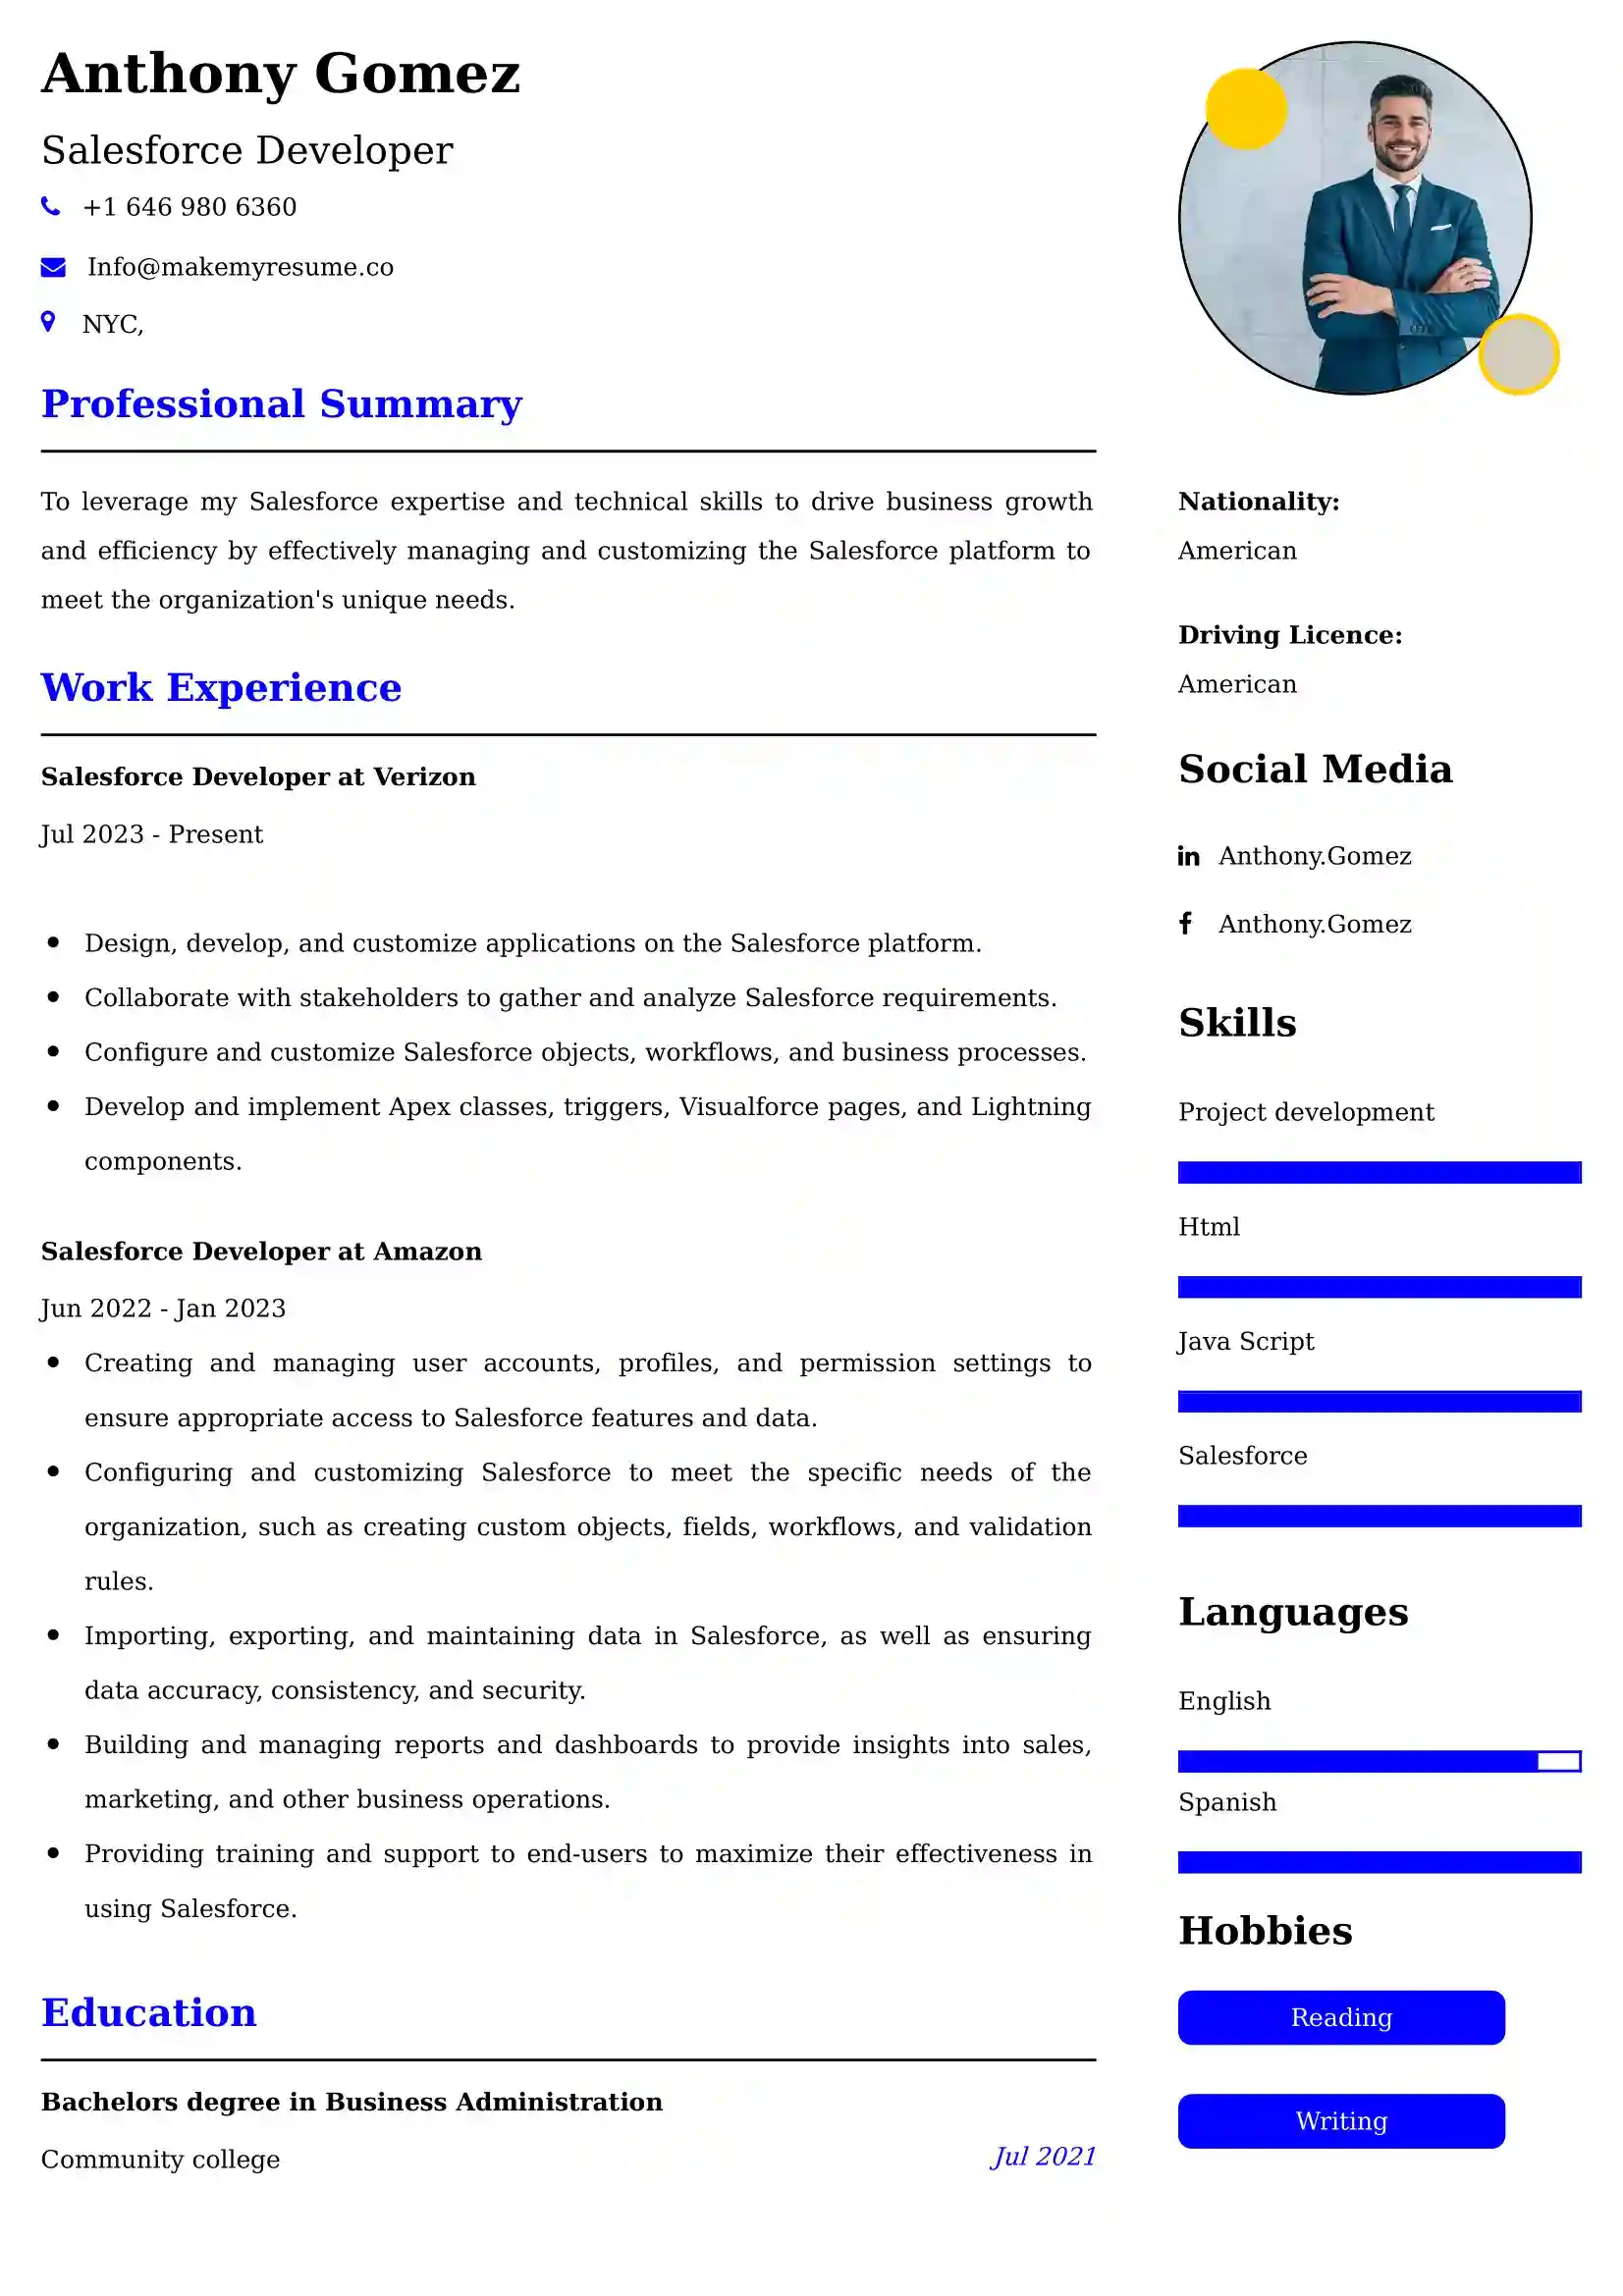 Salesforce Developer Resume Examples for UK Jobs - Tips and Guide